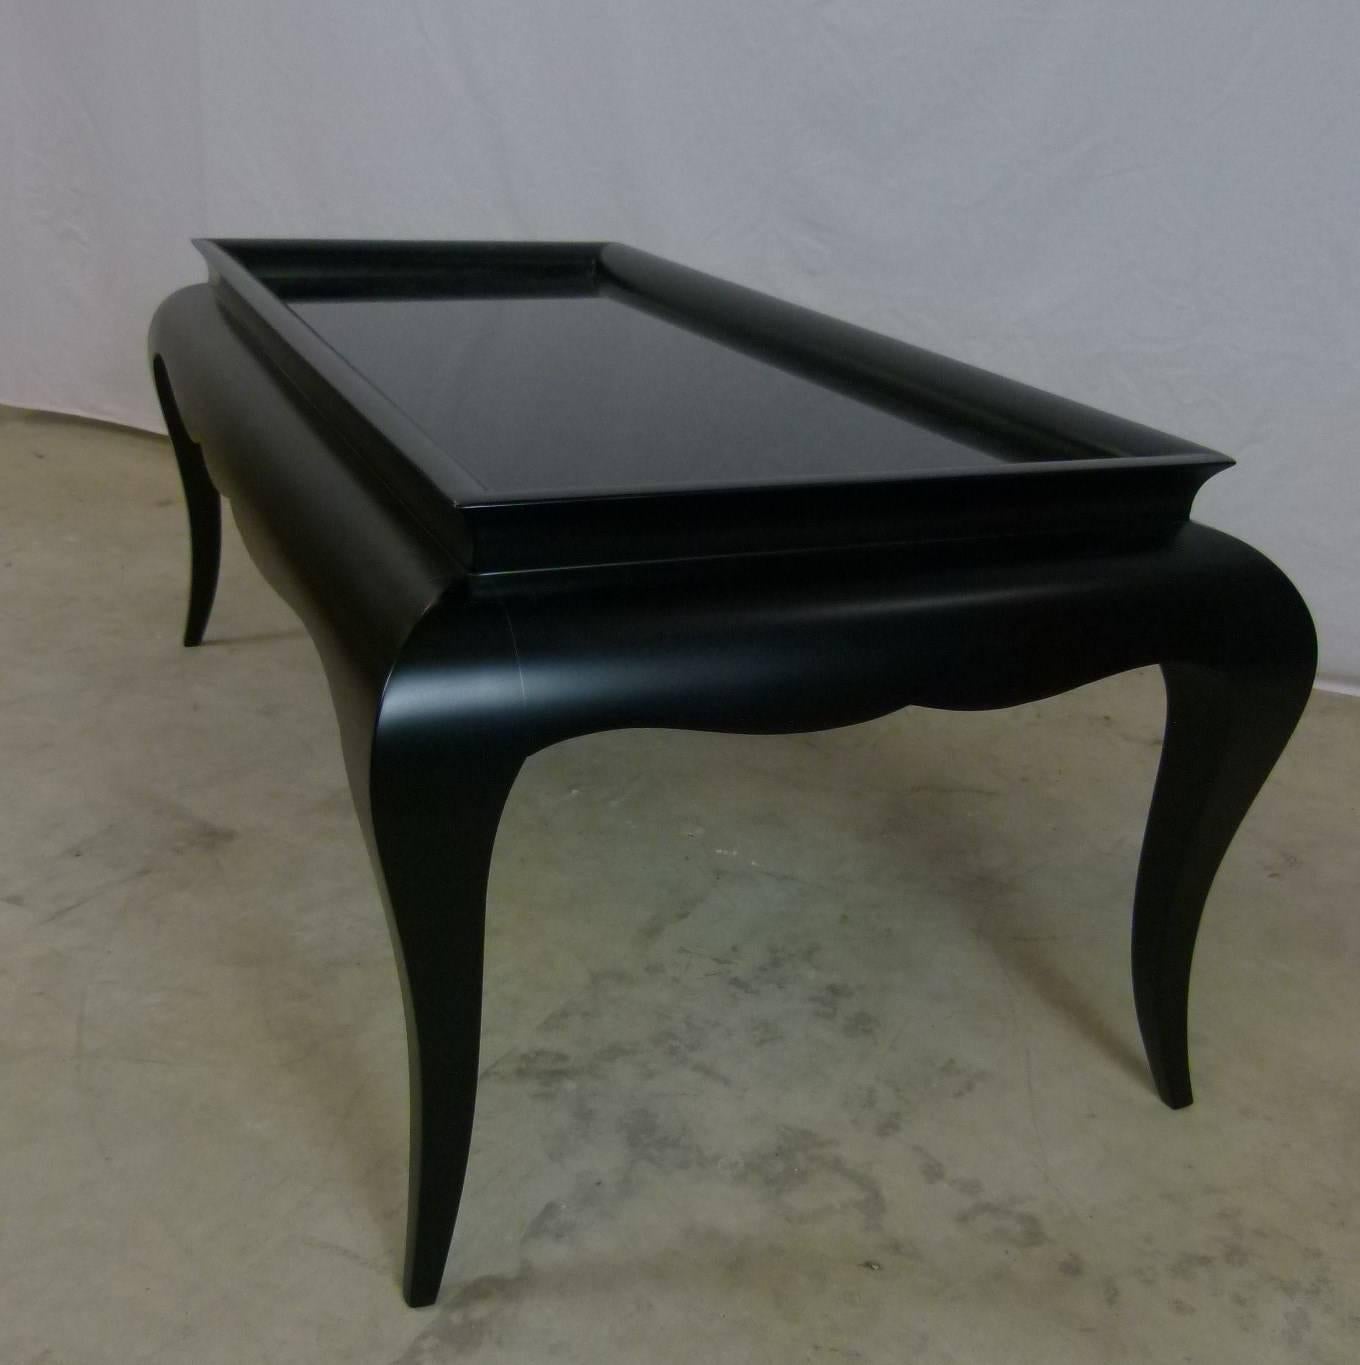 Mid-Century Modern Satin Black Lacquered Coffee Table with Curved Legs circa 1945 by R. Prou